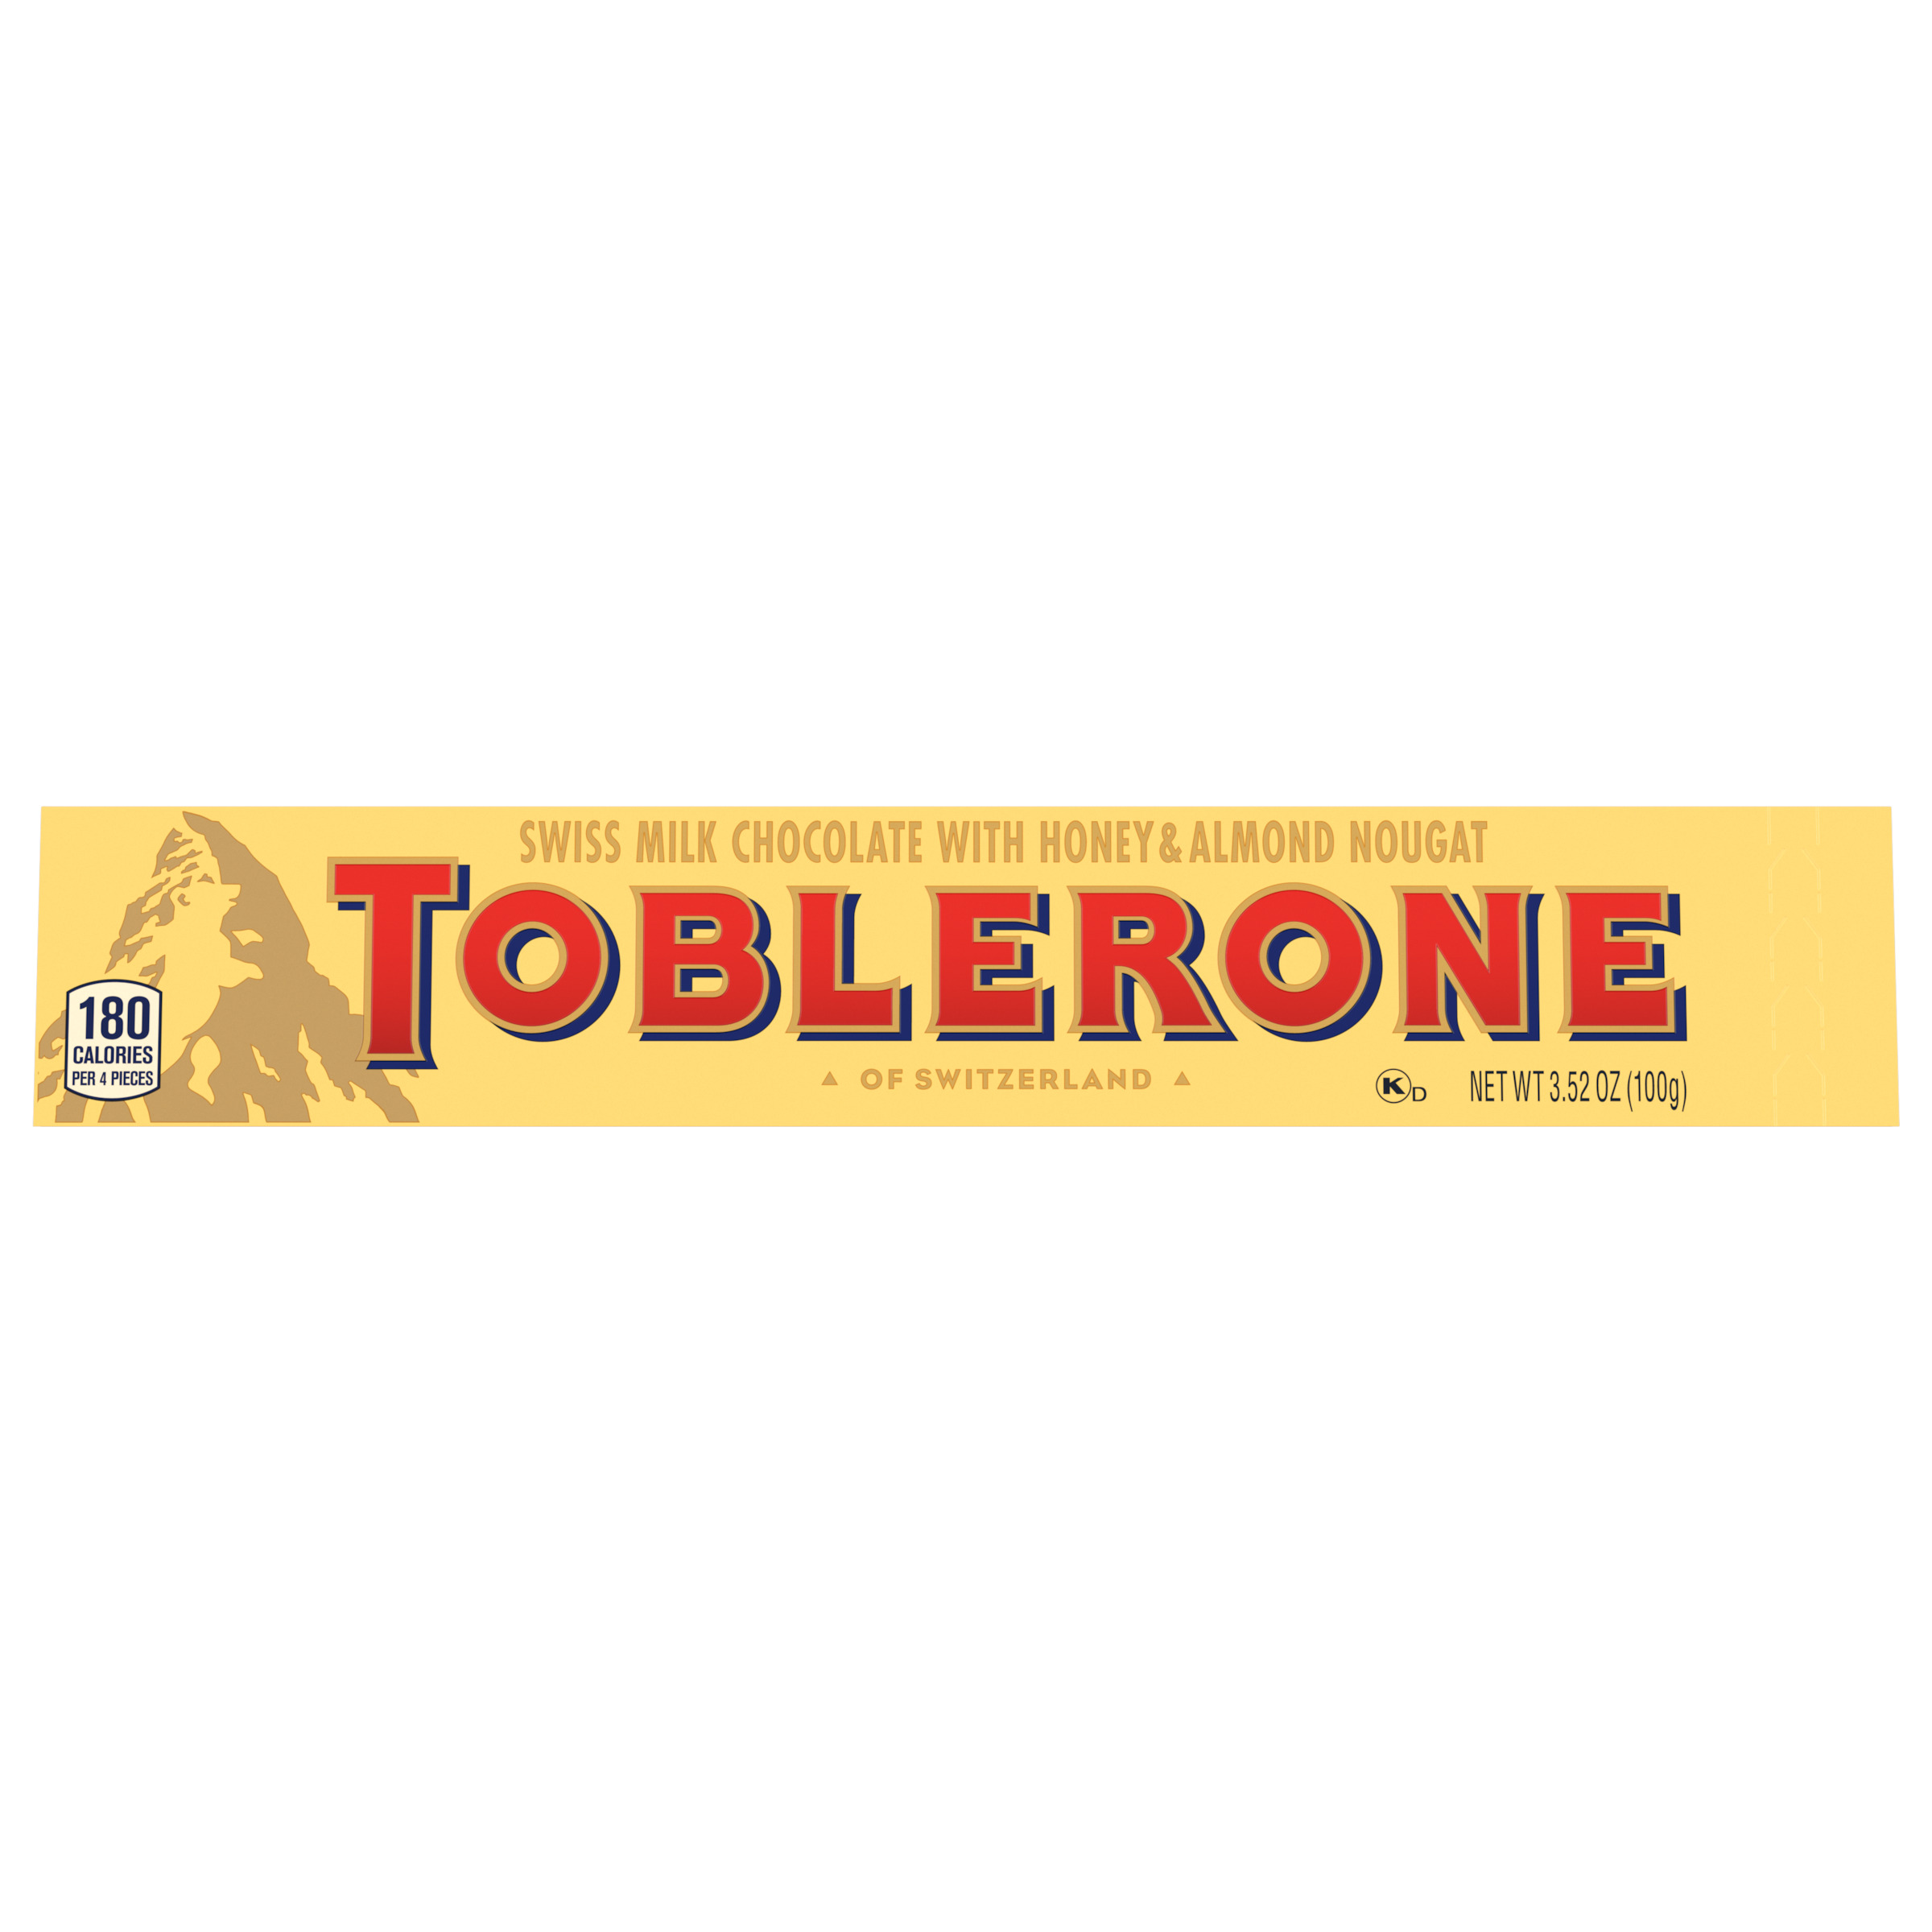 Toblerone Swiss Milk Chocolate Candy Bars with Honey and Almond Nougat, 6 - 3.52 oz Bars-4